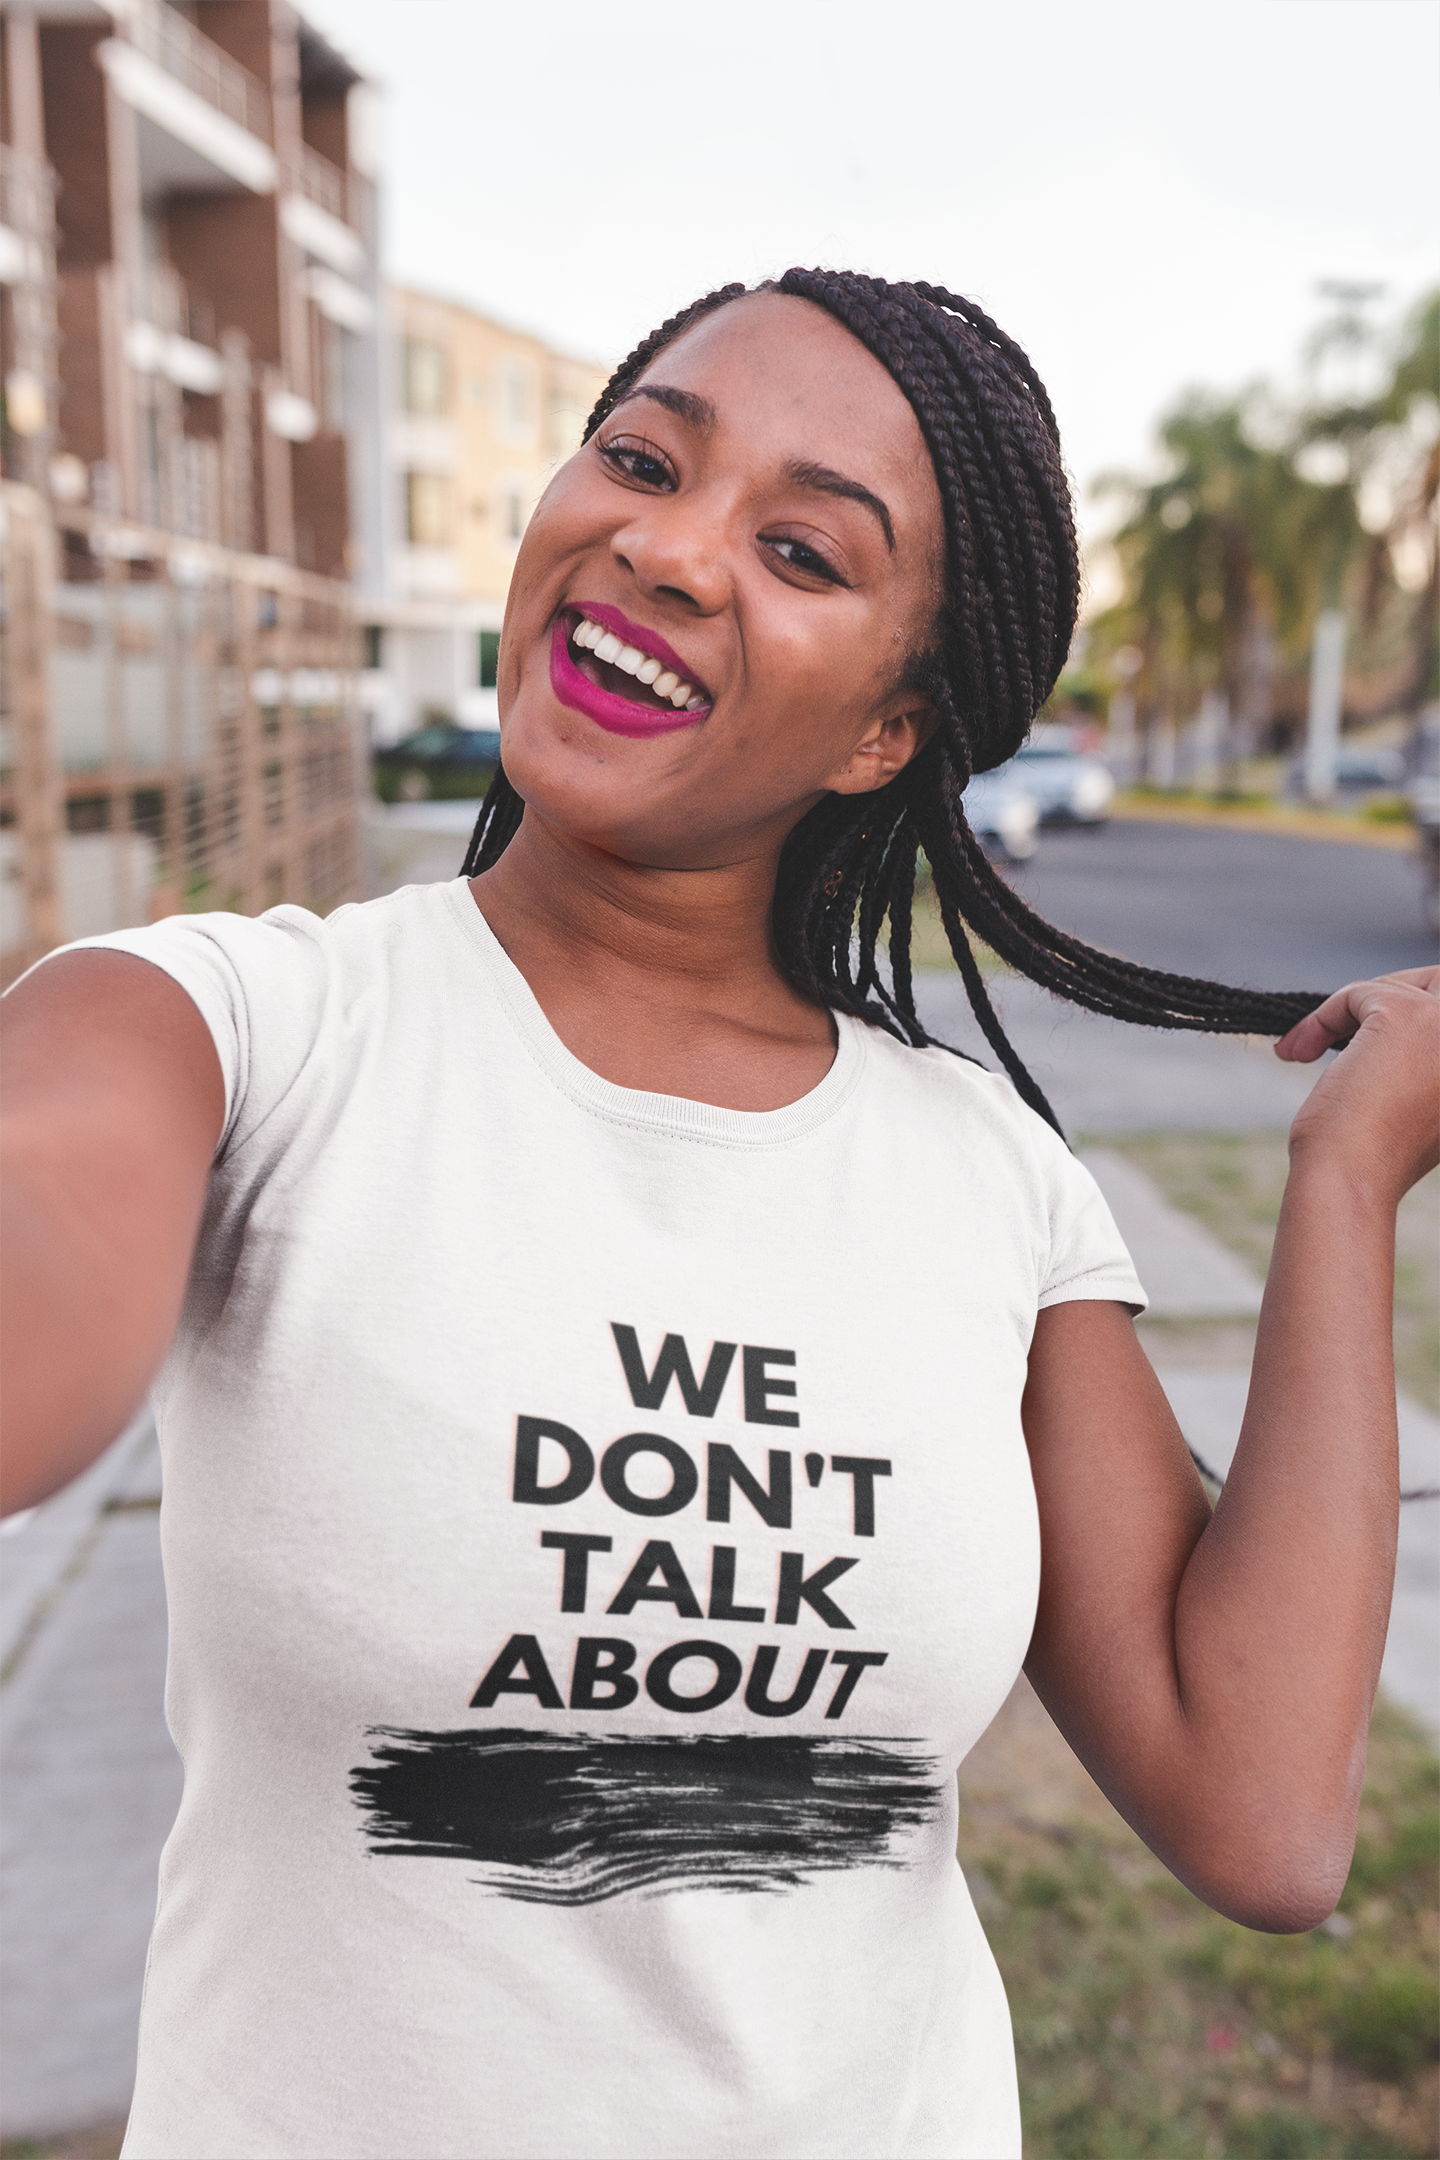 We Don't Talk About Unisex Jersey Short Sleeve Tee